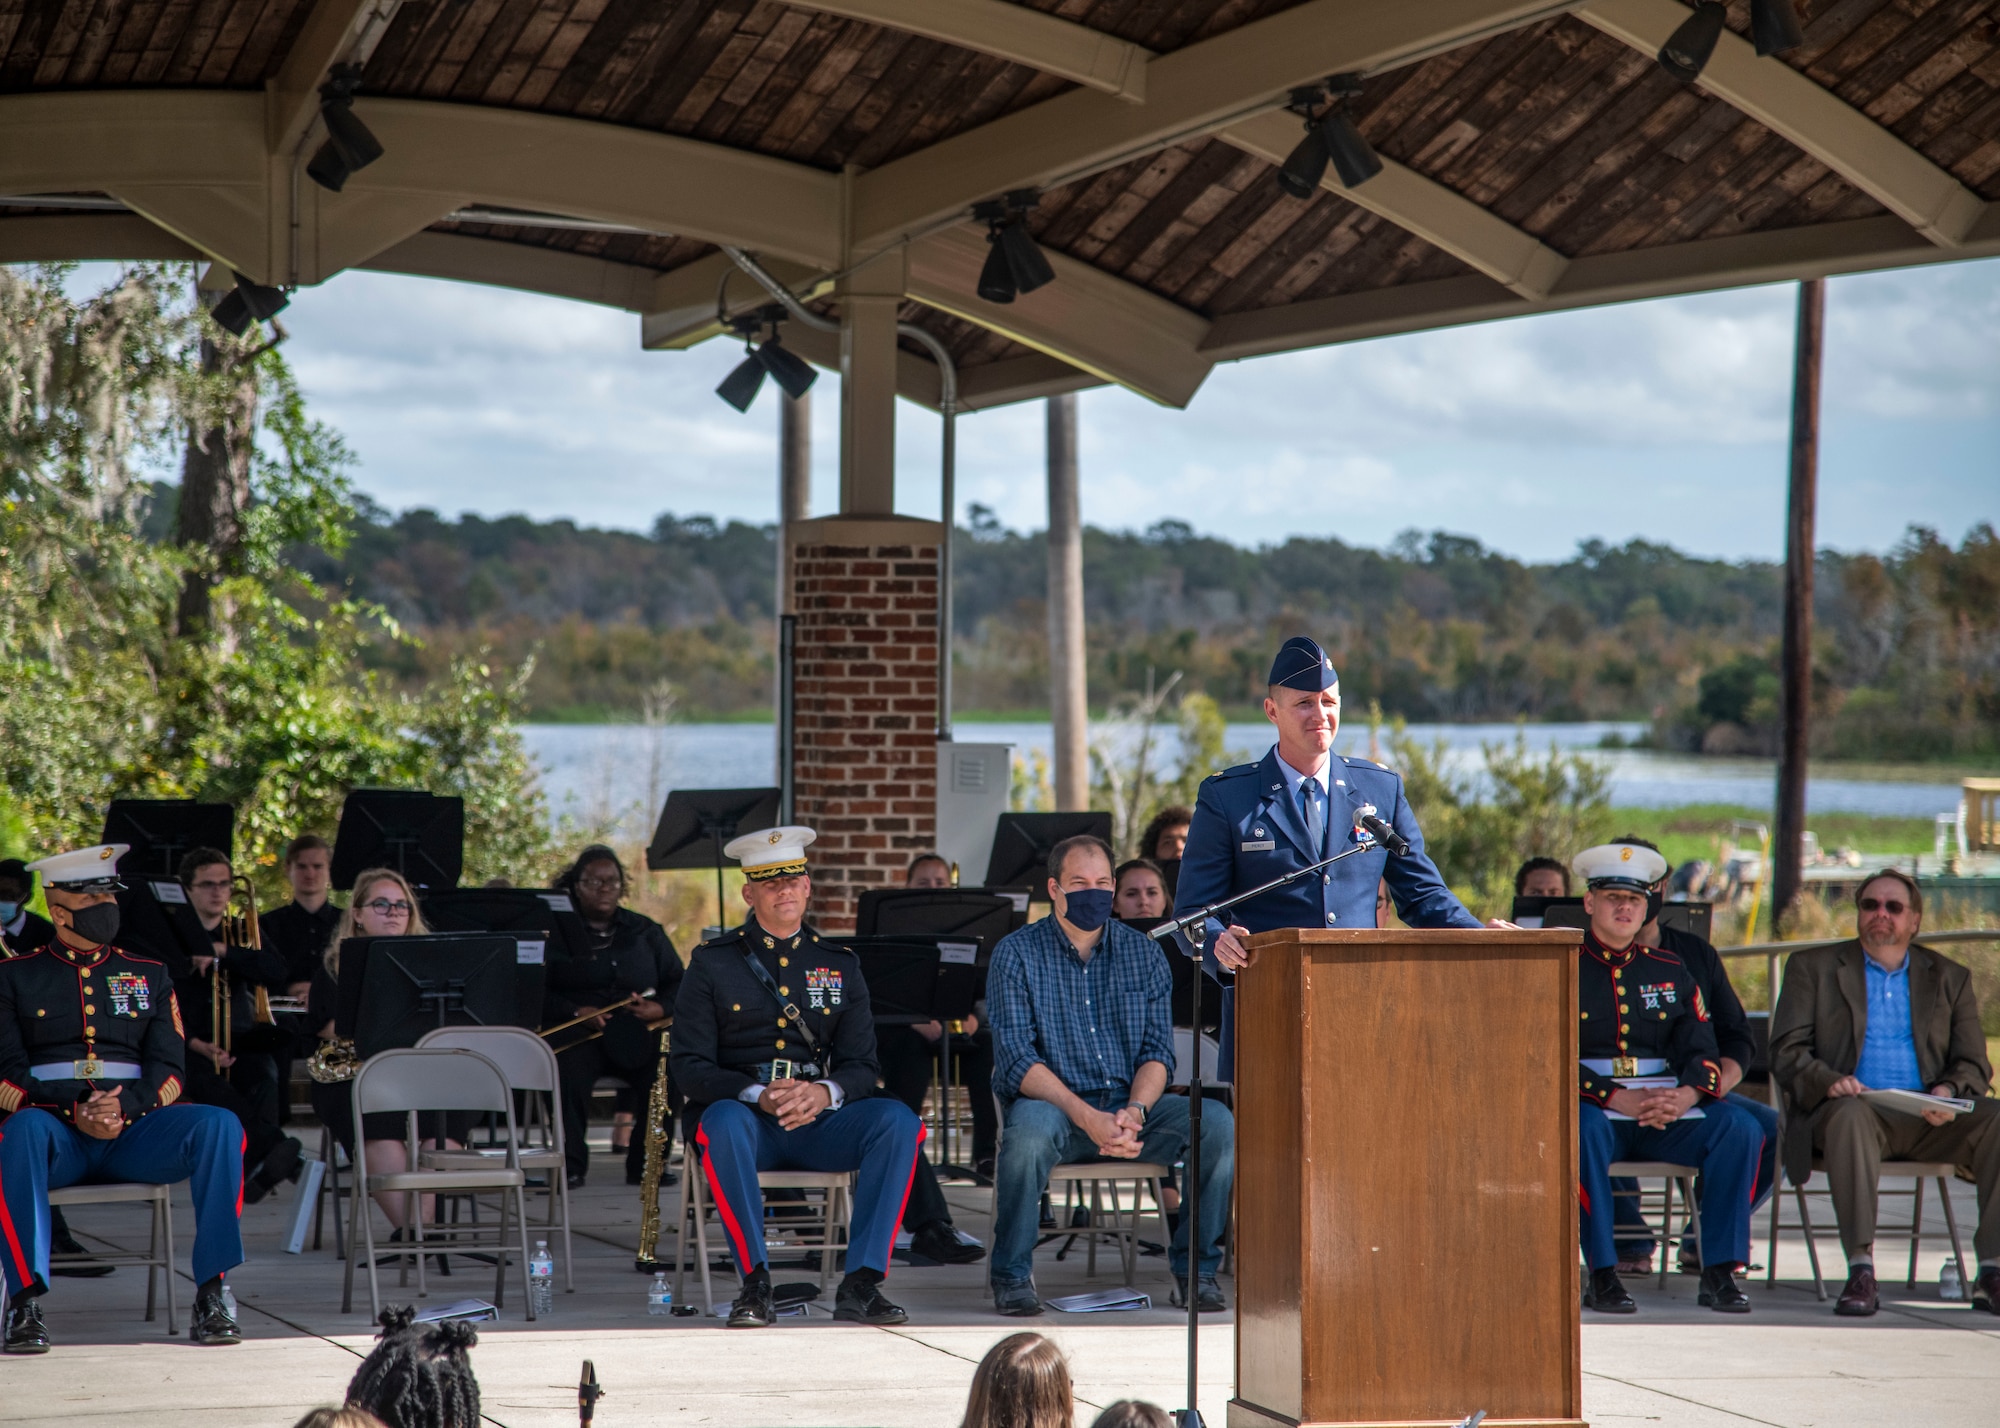 U.S. Air Force Maj. Christopher Piercy, 628th Contracting Squadron commander, speaks at the 8th annual Red, White and Blue Festival at the Hanahan Amphitheater, in Hanahan, S.C., November 7, 2020. Mayor Christie Rainwater, City of Hanahan mayor, and members of U.S. Marine Corps Recruiting Station Columbia also spoke about the importance of Veterans Day at the event. Additionally, the Joint Base Charleston Honor Guard presented the colors of each branch of service while the Charleston Southern University Concert Band played the official songs of the Army, Marine Corps, Navy, Air Force and Coast Guard.